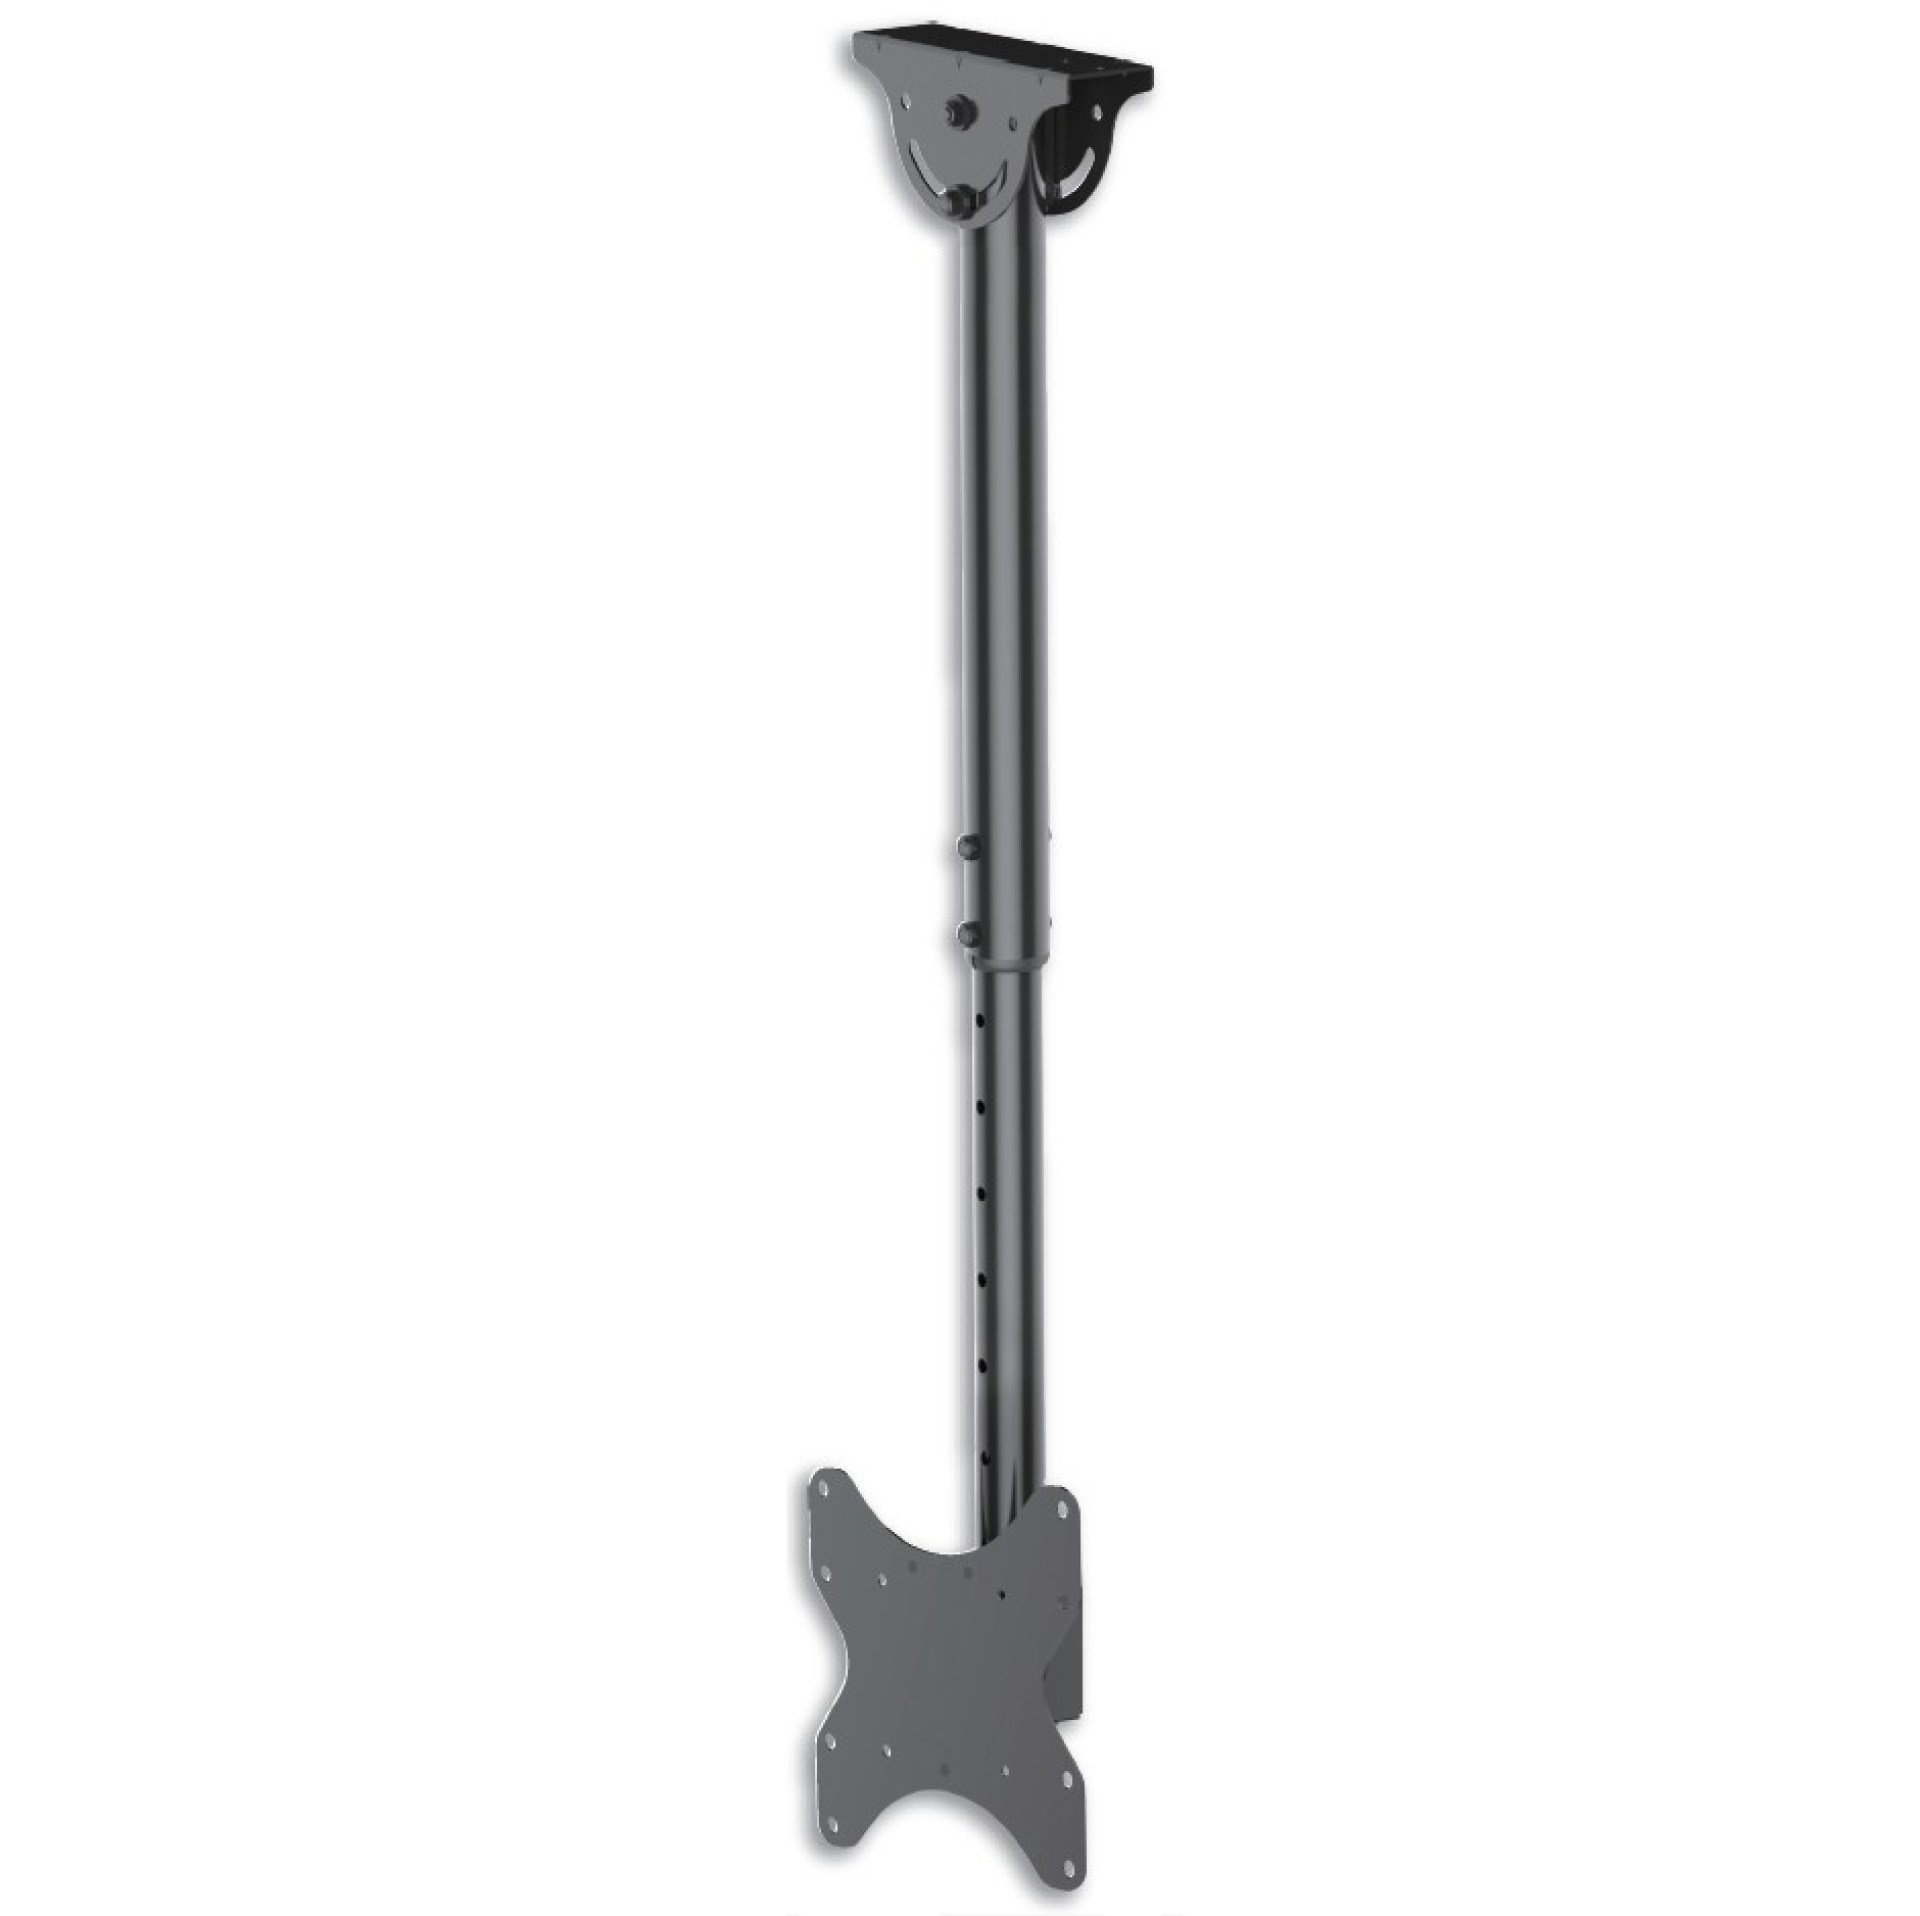 Telescopic universal  ceiling support for 1 LED LCD TV 23"- 42", long arm